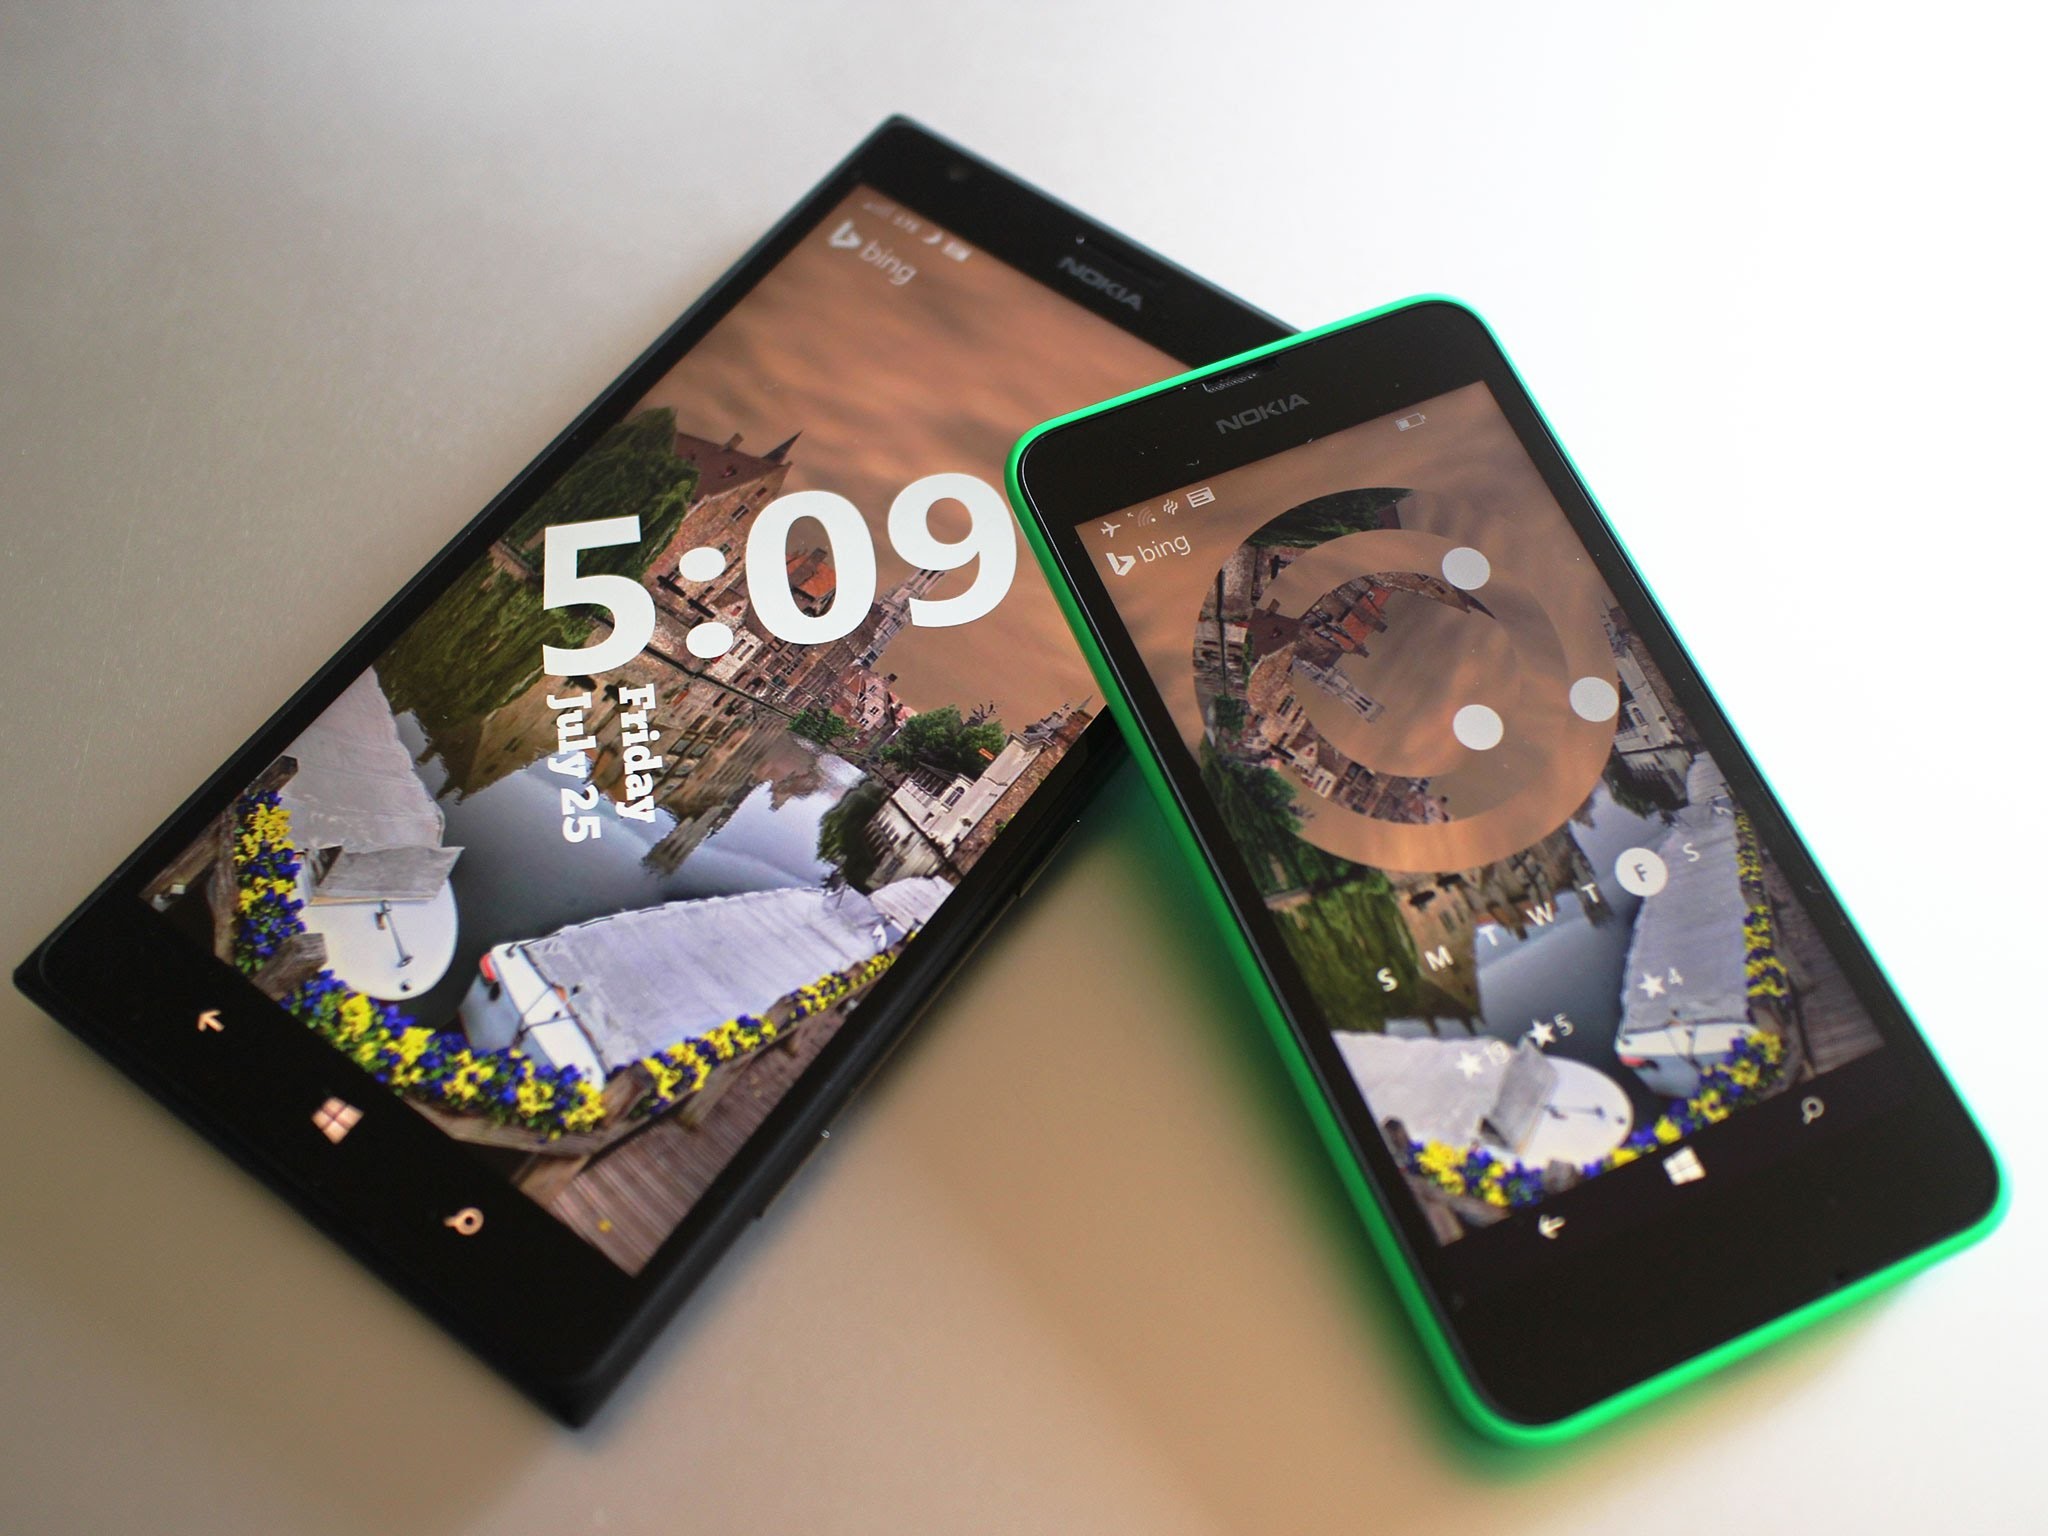 Hands-on With The New Live Lock Screen App For Windows - Smartphone - HD Wallpaper 